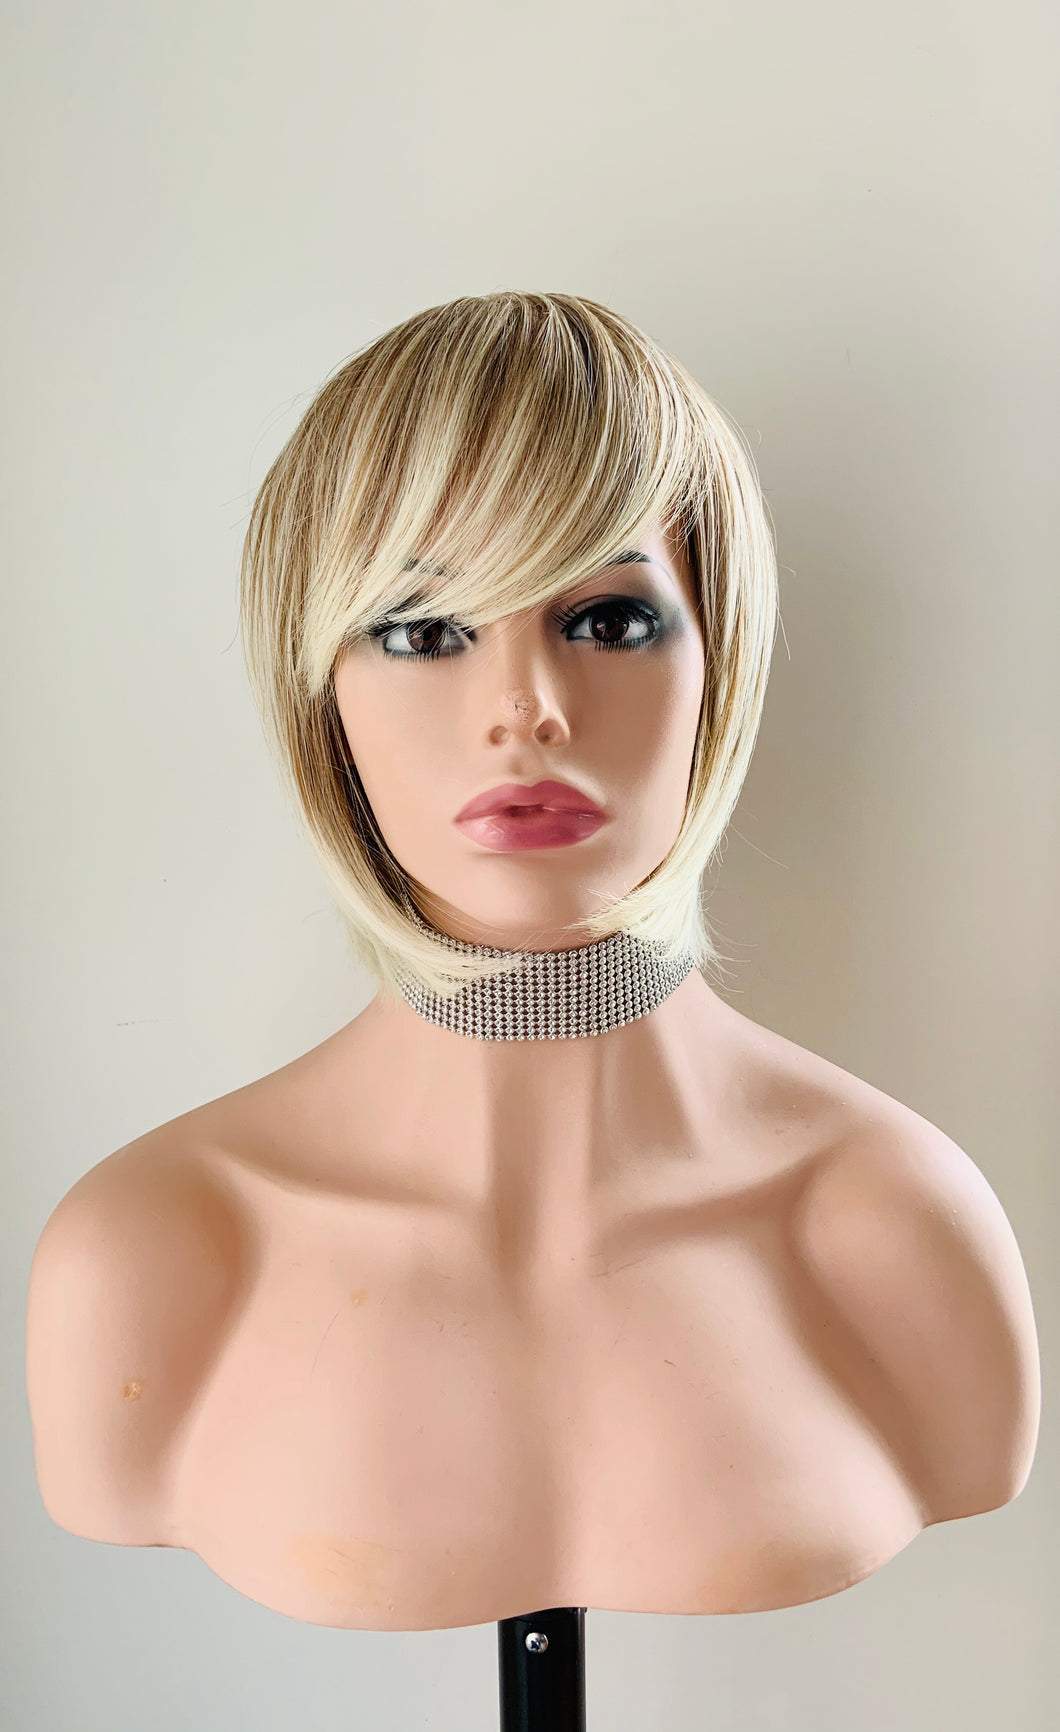 “Courtney” - Cute & Classic Short Blonde Synthetic Wig with Bangs for Daily Wear or Events